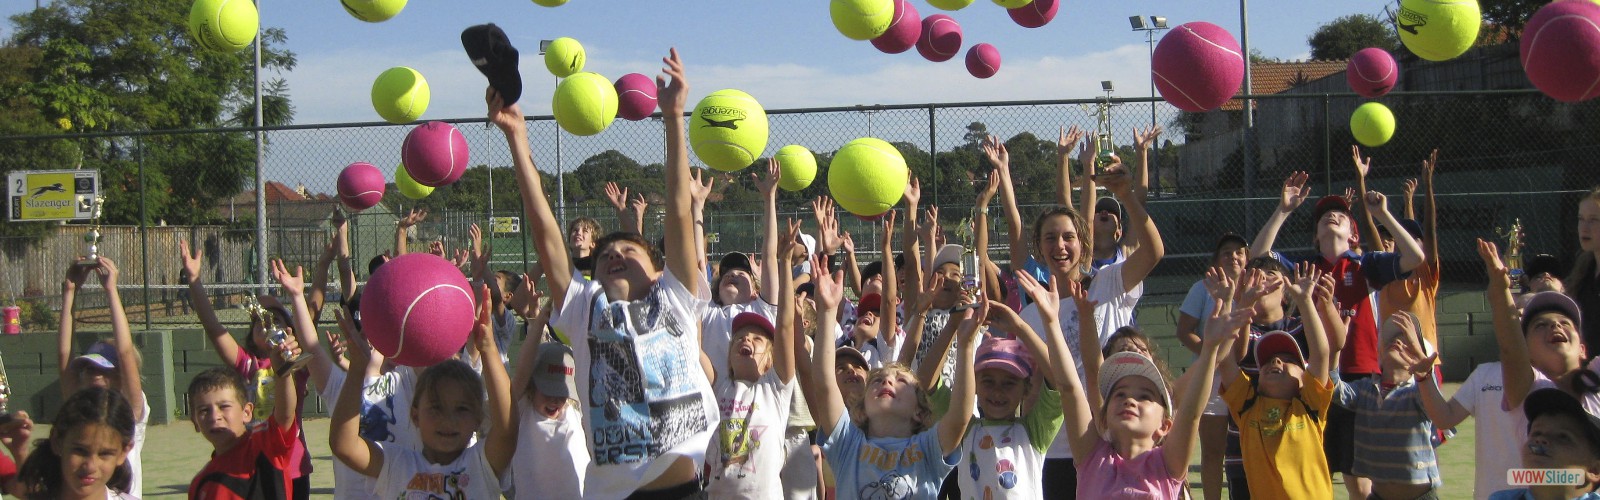 BOOKINGS NOW OPEN- SPRING TENNIS CAMPS